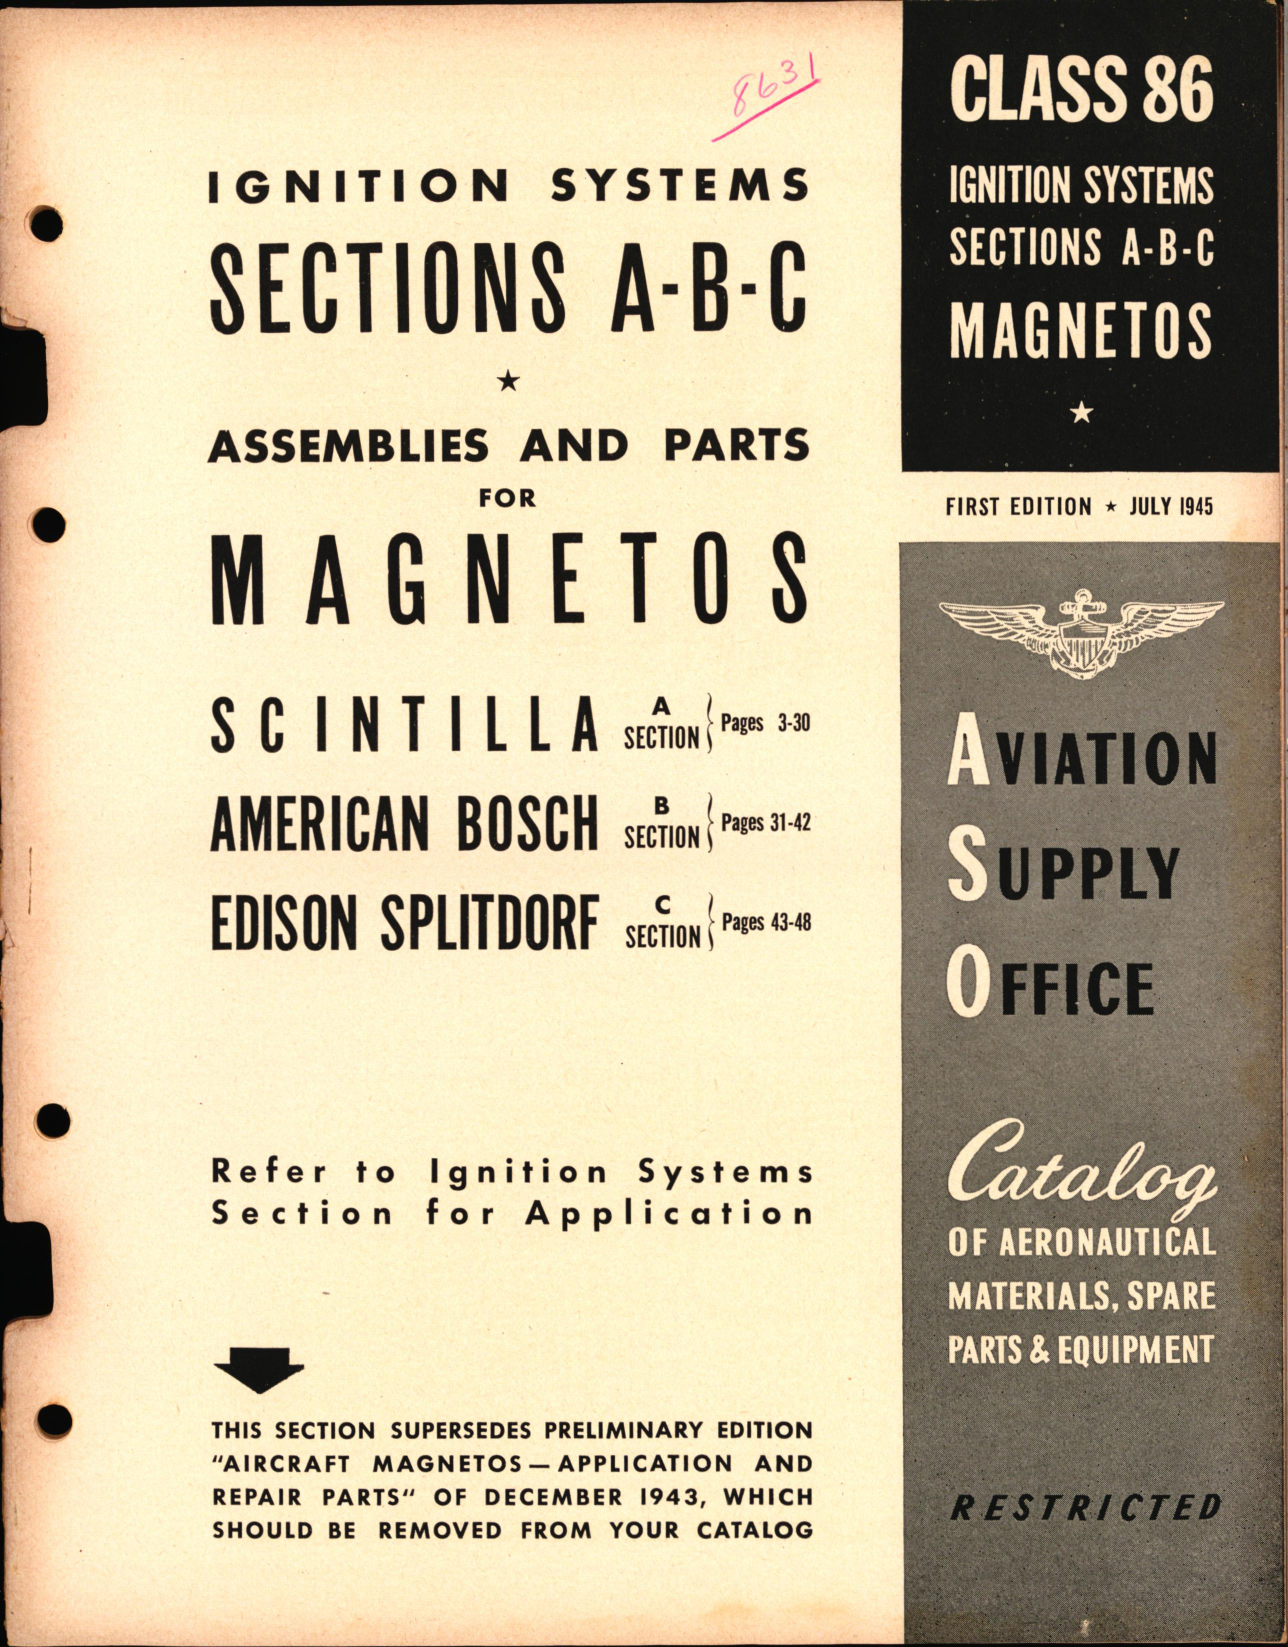 Sample page 1 from AirCorps Library document: Ignition Systems Sections A-B-C, Assemblies and Parts for Magnetos